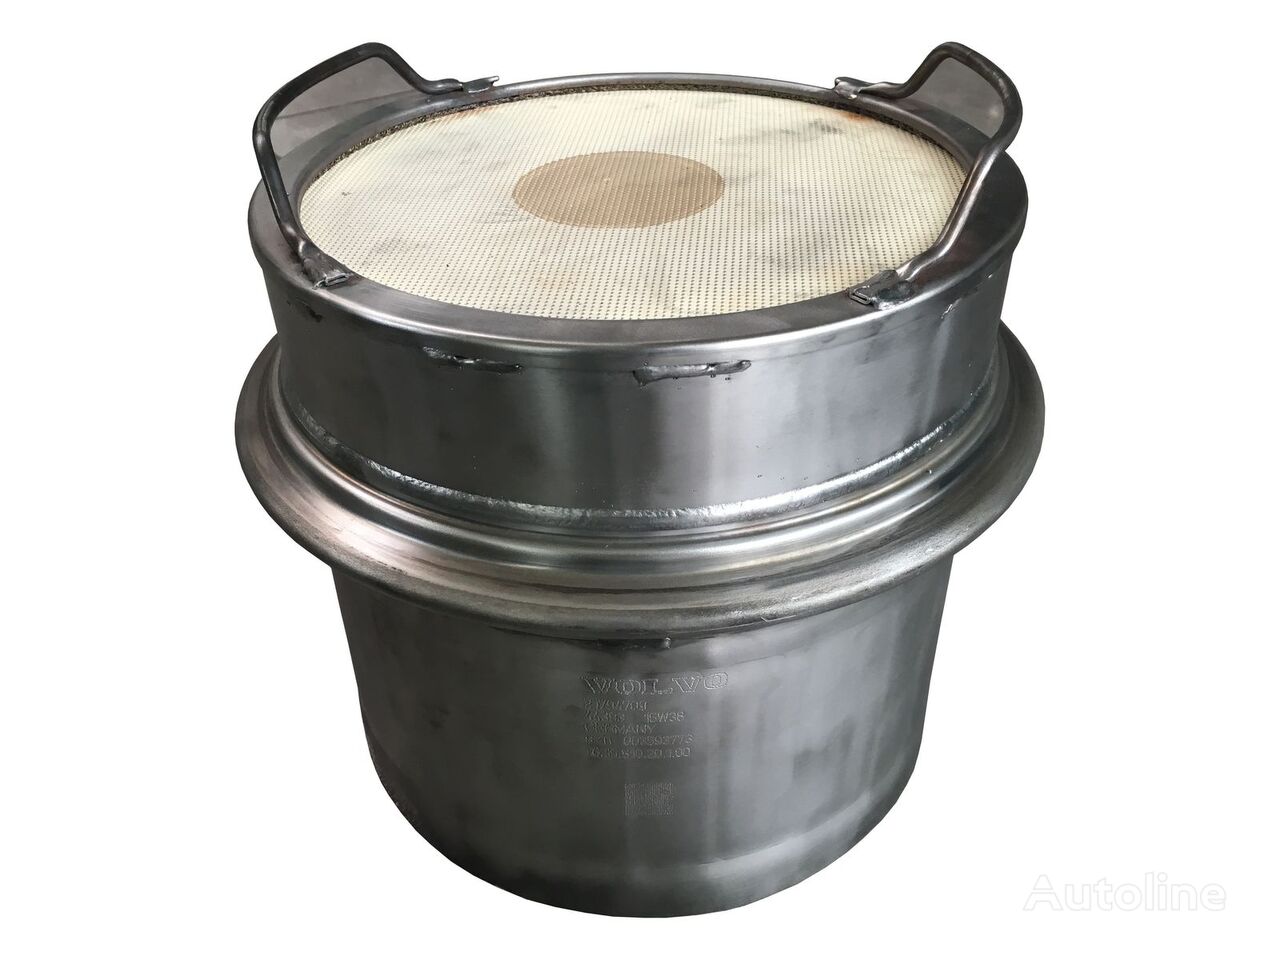 Renault Euro 6 particulate filter for Renault Seria D truck